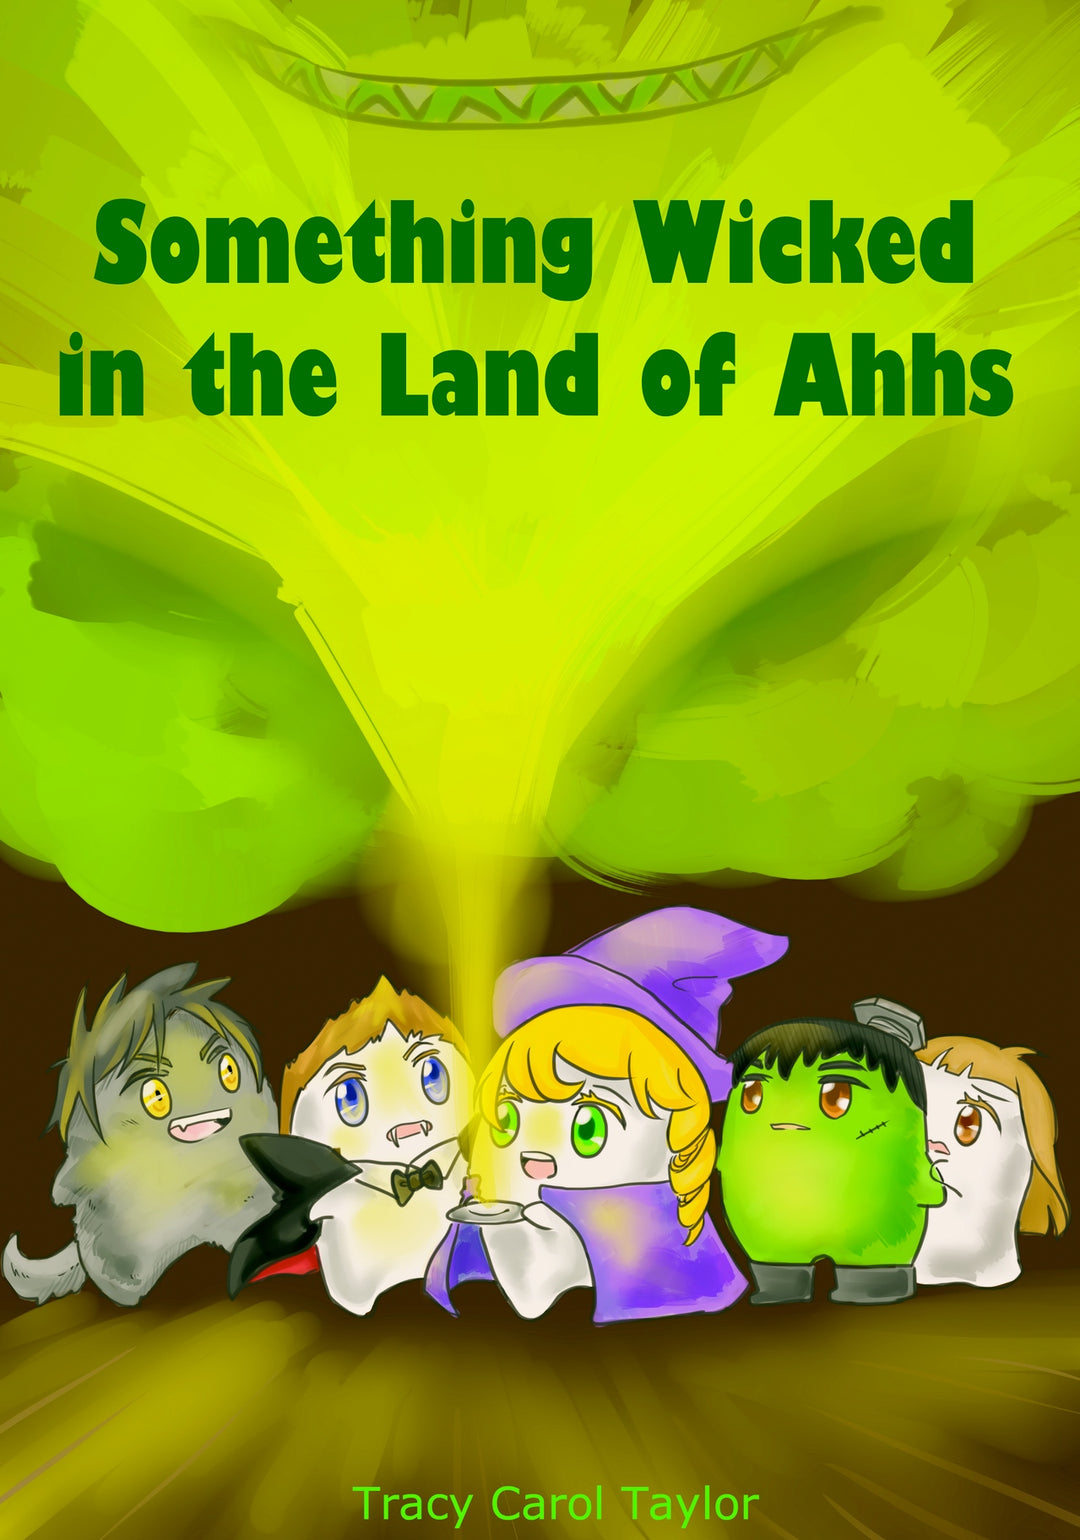 Something Wicked in the Land of Ahhhs - Young Adult Fiction / Dental Fiction